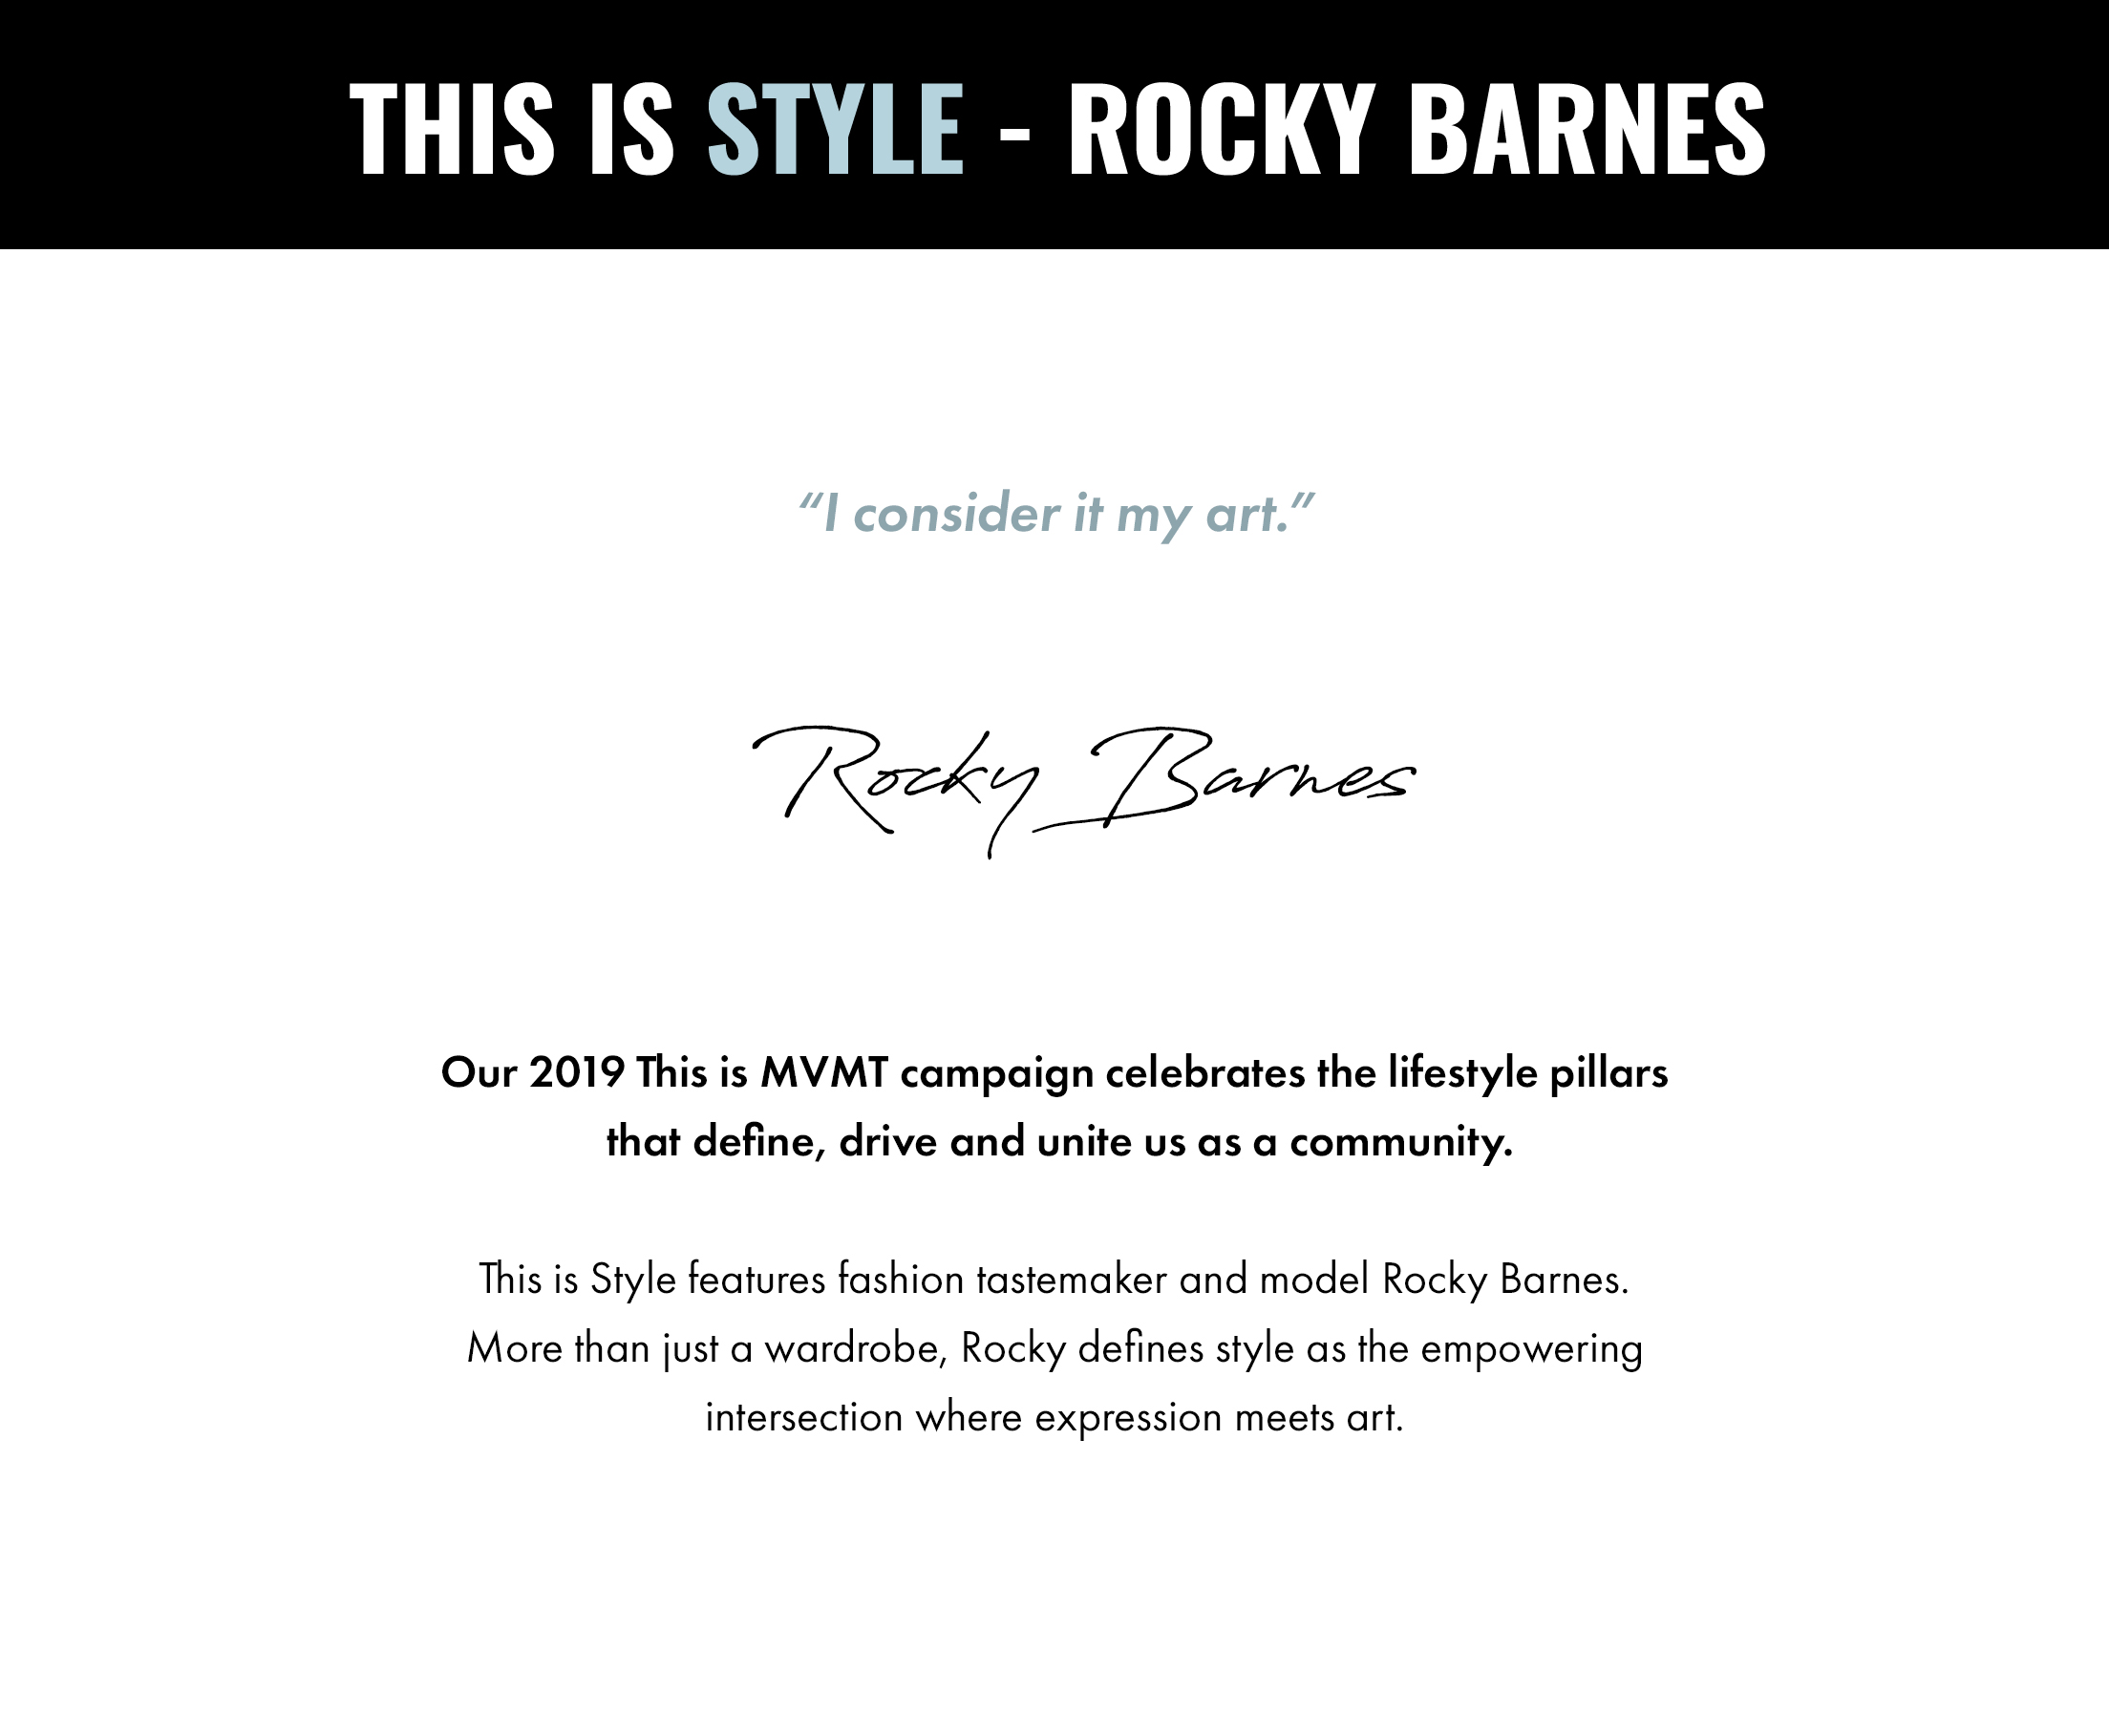 This is Style - Rocky Barnes. "I consider it my art." -Rocky Barnes. Our 2019 This is MVMT campaign celebrates the lifestyle pillars that define, drive and unite us as a community. This is Style features fashion tastemaker and model Rocky Barnes. More than just a wardrobe, Rocky defines style as the empowering intersection where expression meets art.